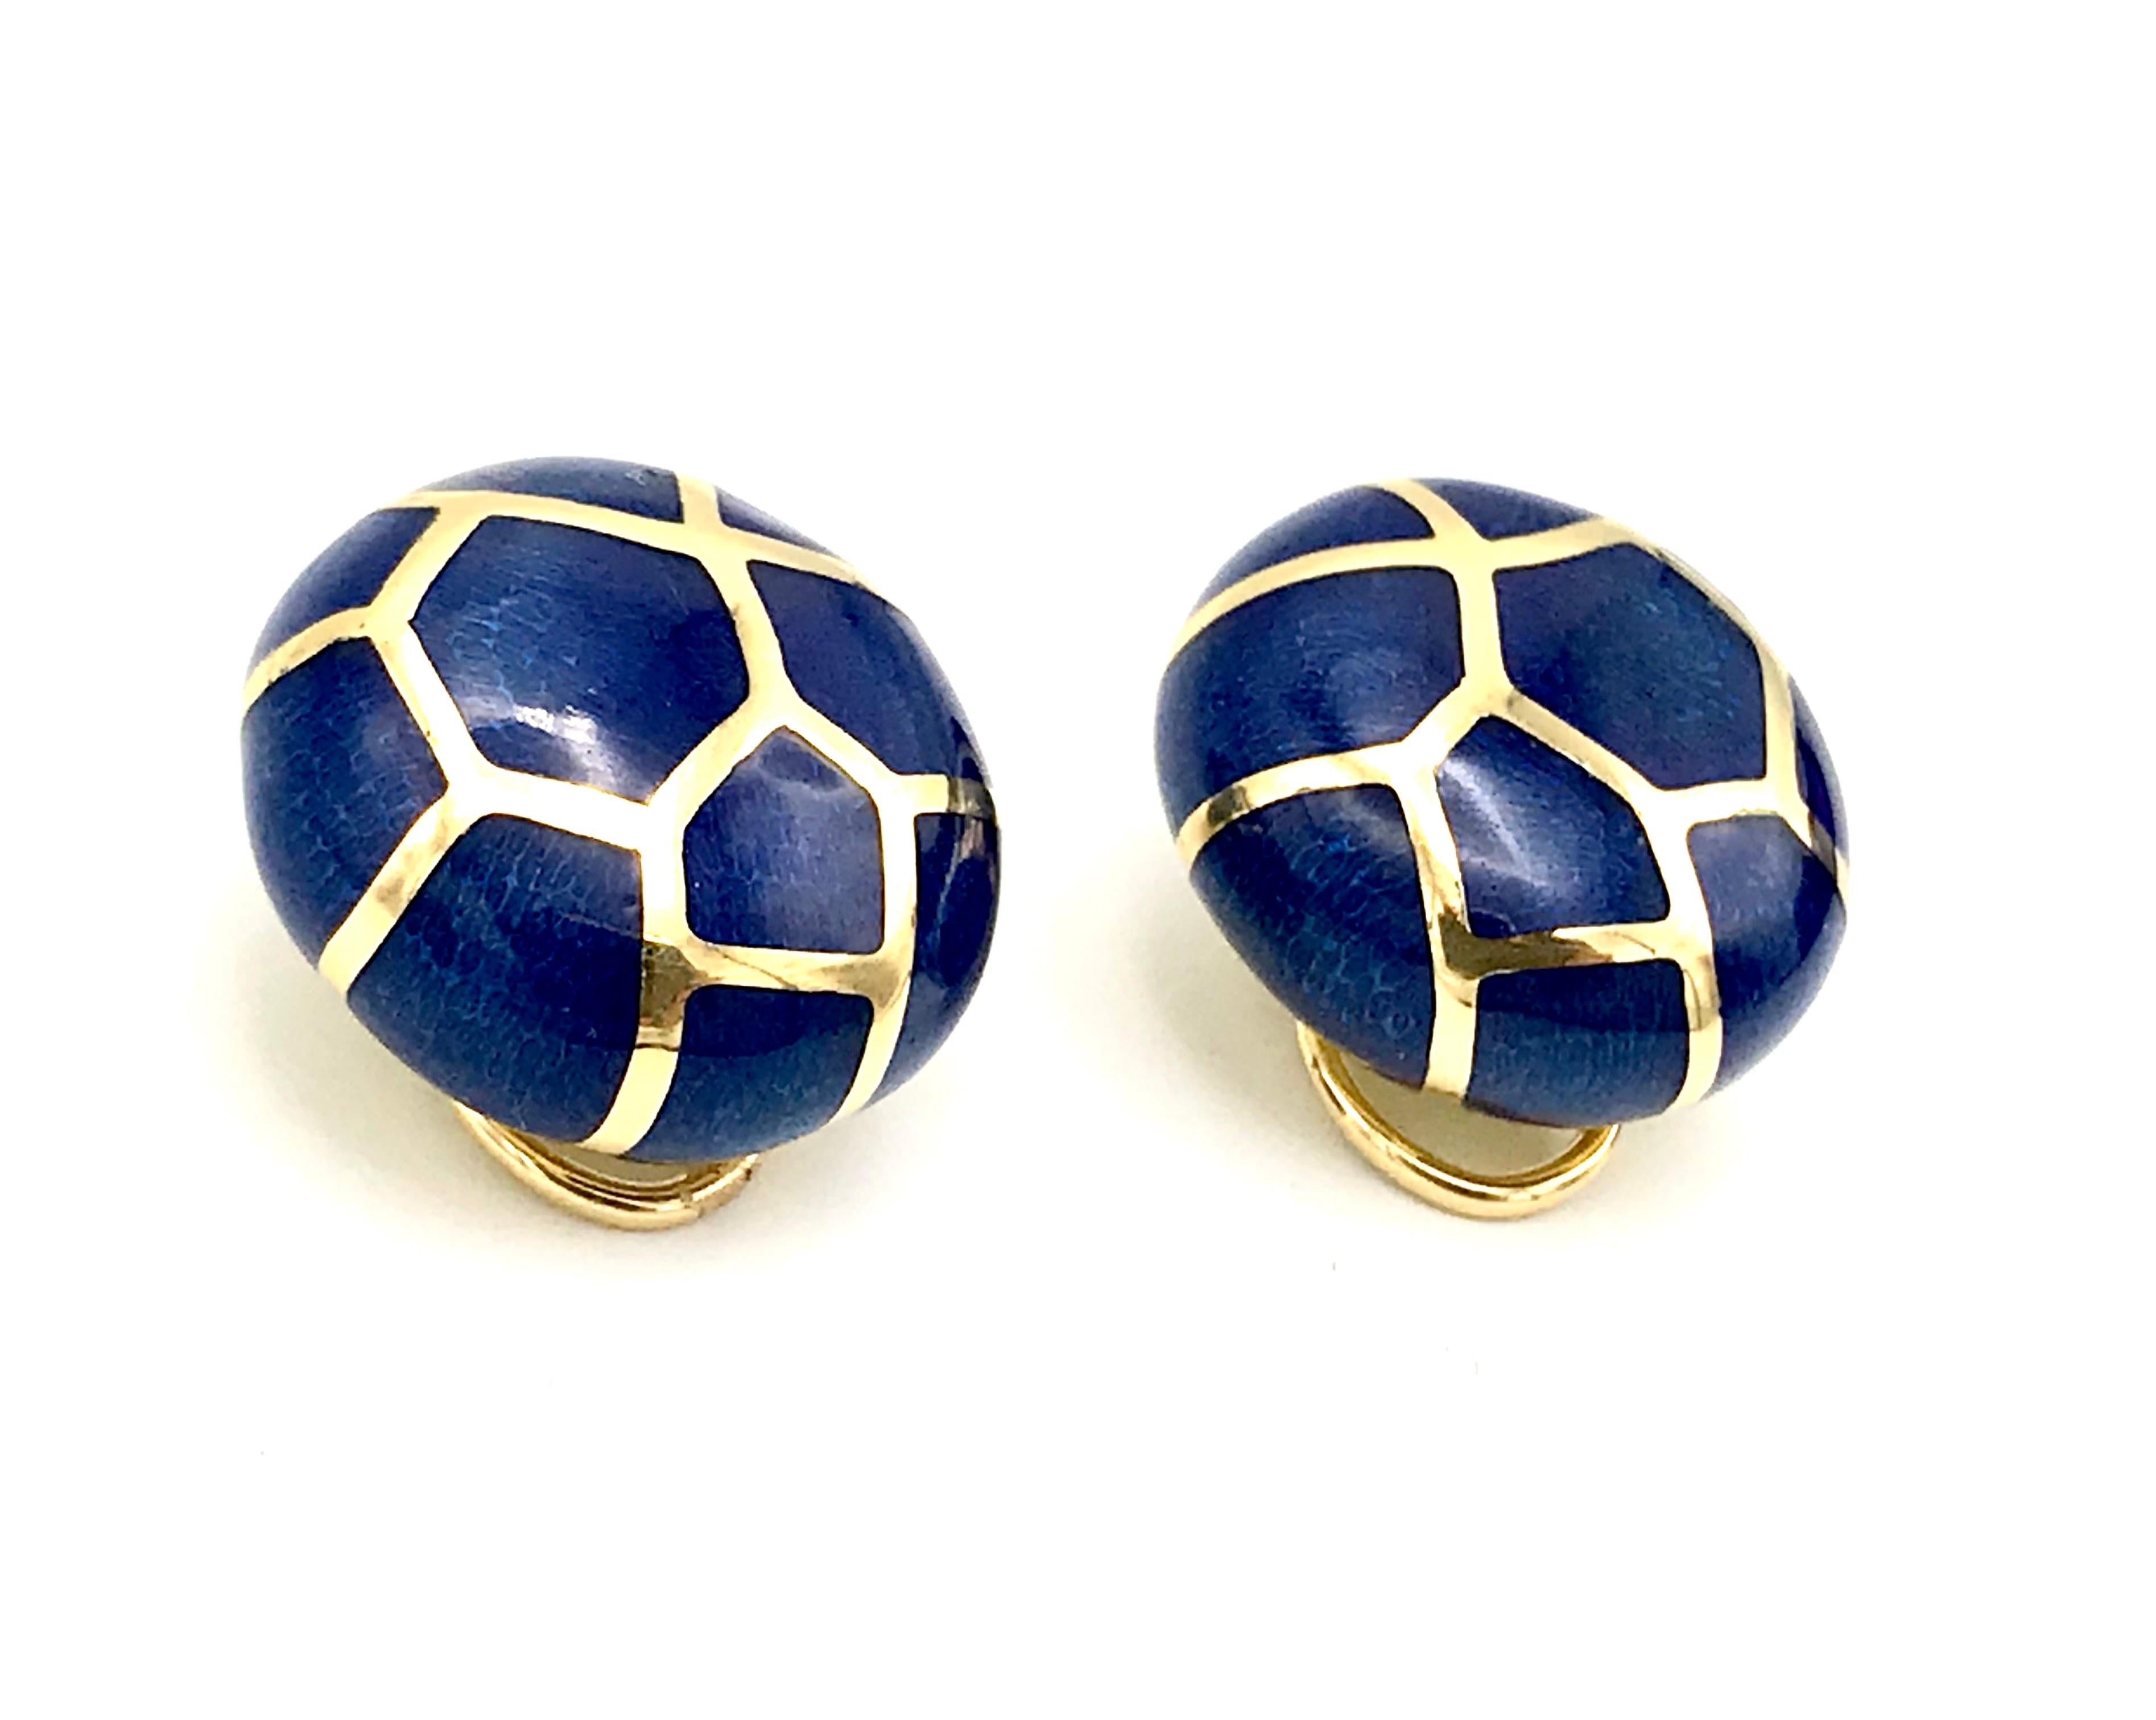 Gorgeous button clip-on earrings by Angela Cummings. Made of 18k yellow gold and blue enamel. Features omega clips; posts can be added. Enamel is fully intact. Stamped with Angela Cummings maker's mark and a hallmark for 18k gold.
Measurements: